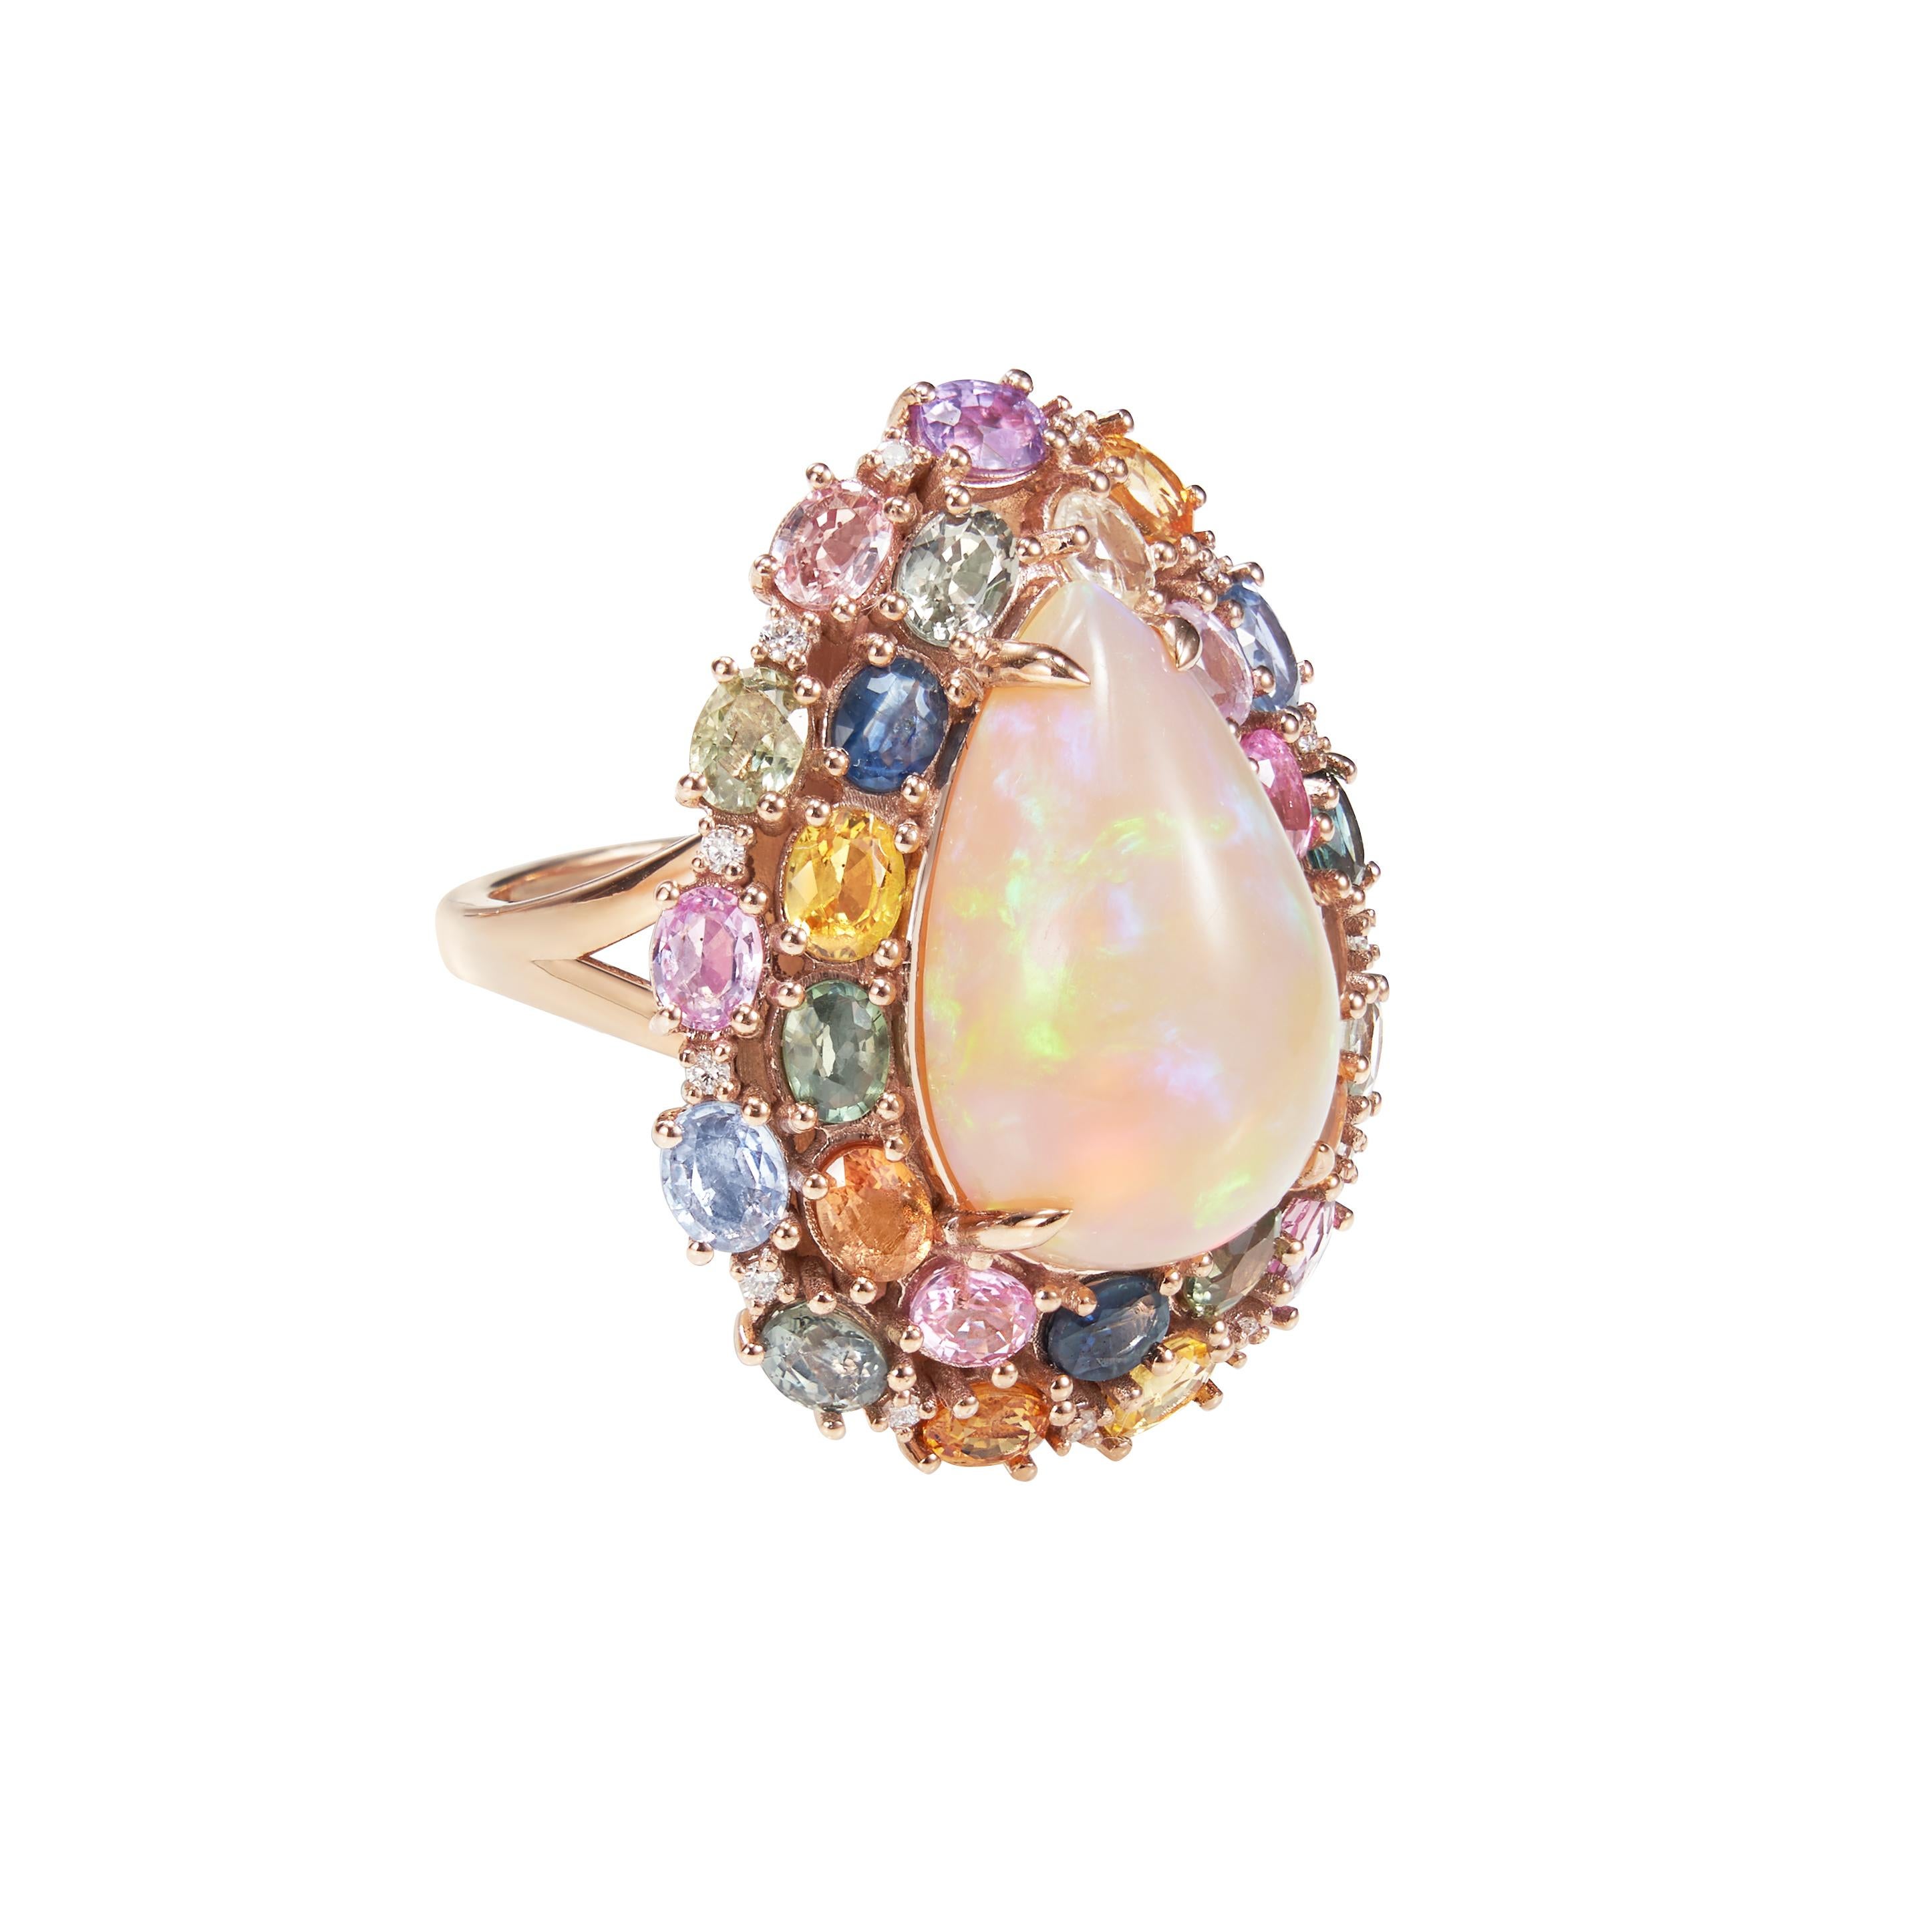 Sunita Nahata presents an exquisite Ethiopian Opal cabochon ring accented with rainbow sapphires and dazzling diamonds to accentuate the fire and sparkle within this colorful opal. The gorgeous and colorful gems on this ring will grab every